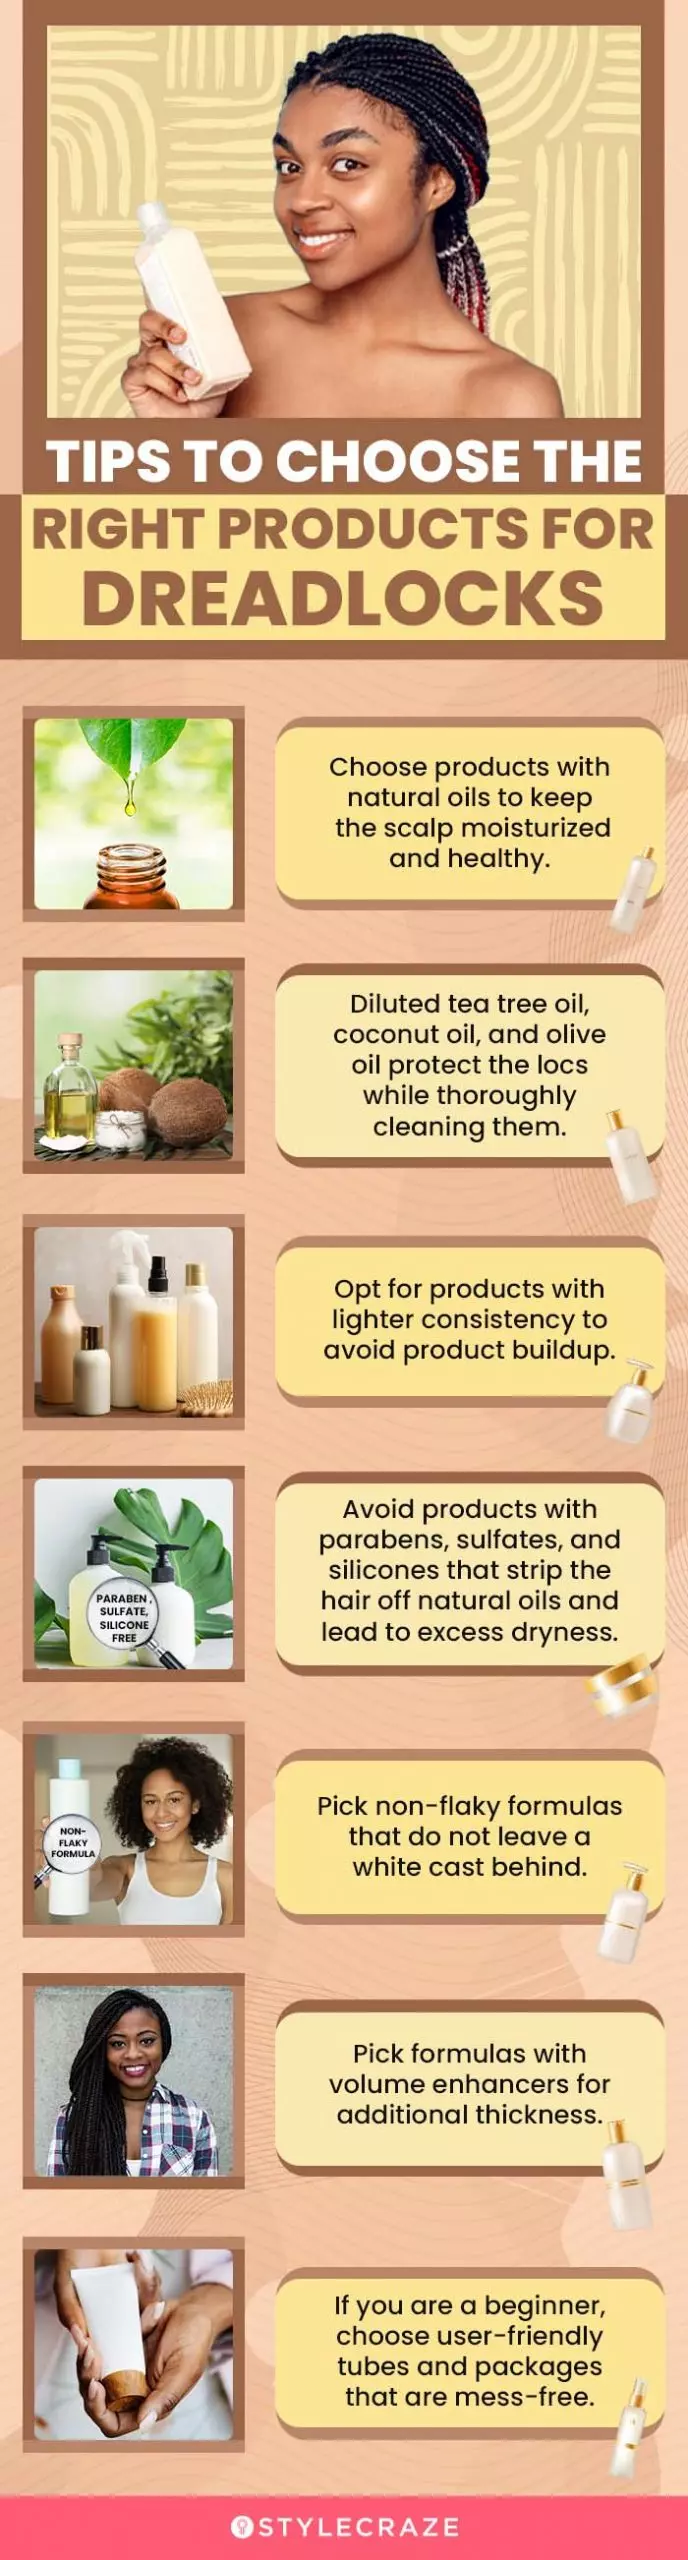 Tips To Choose The Right Products For Dreadlocks (infographic)